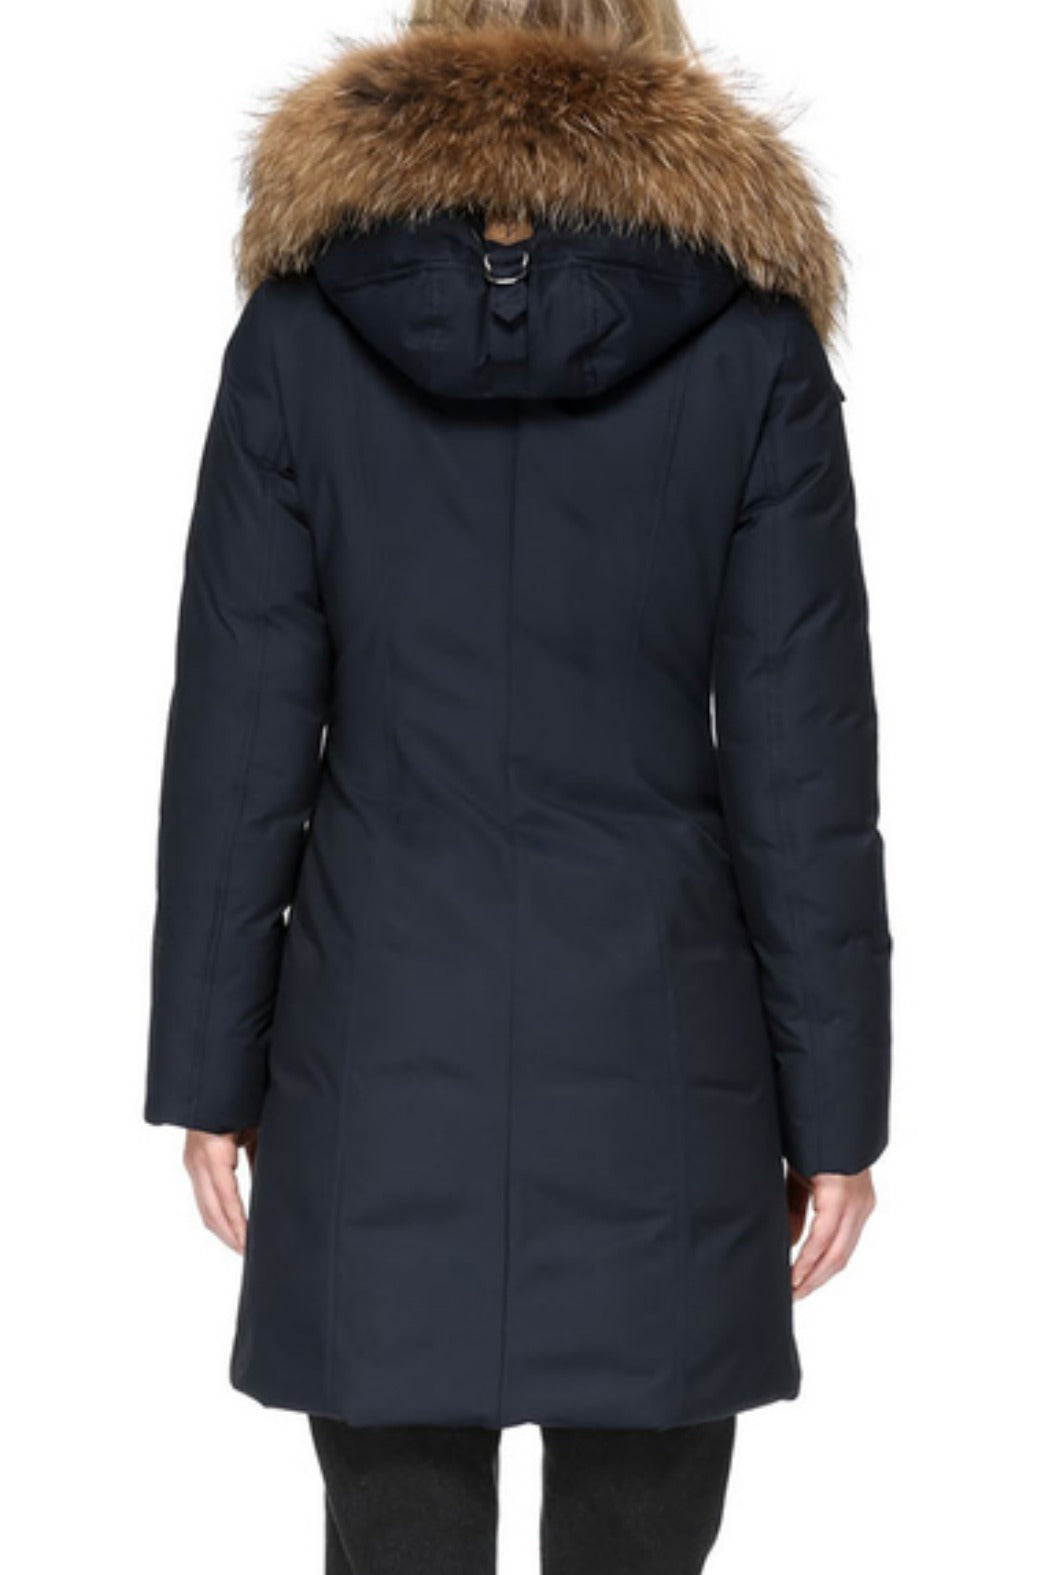 Kerry Winter Down Coat with Fur